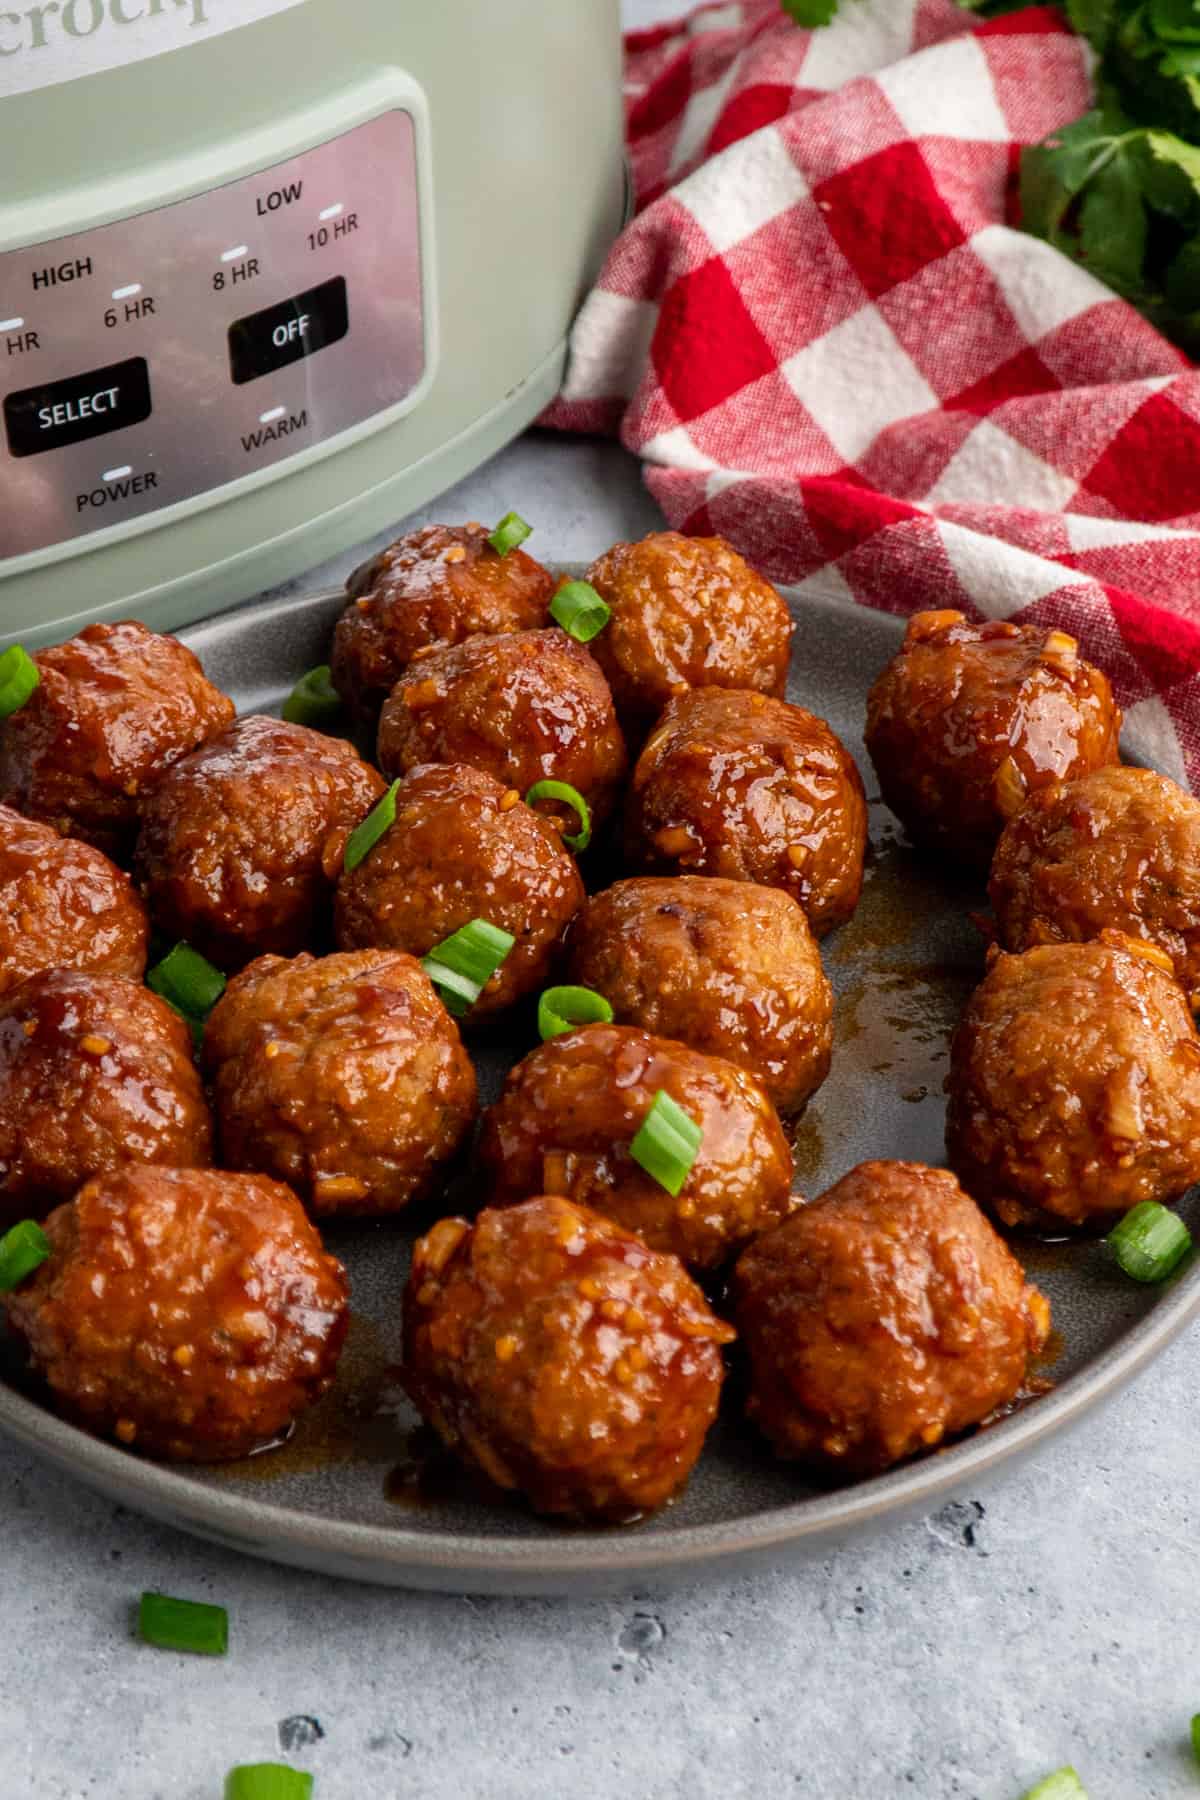 Crock pot honey garlic meatballs on a plate garnished with green onions.